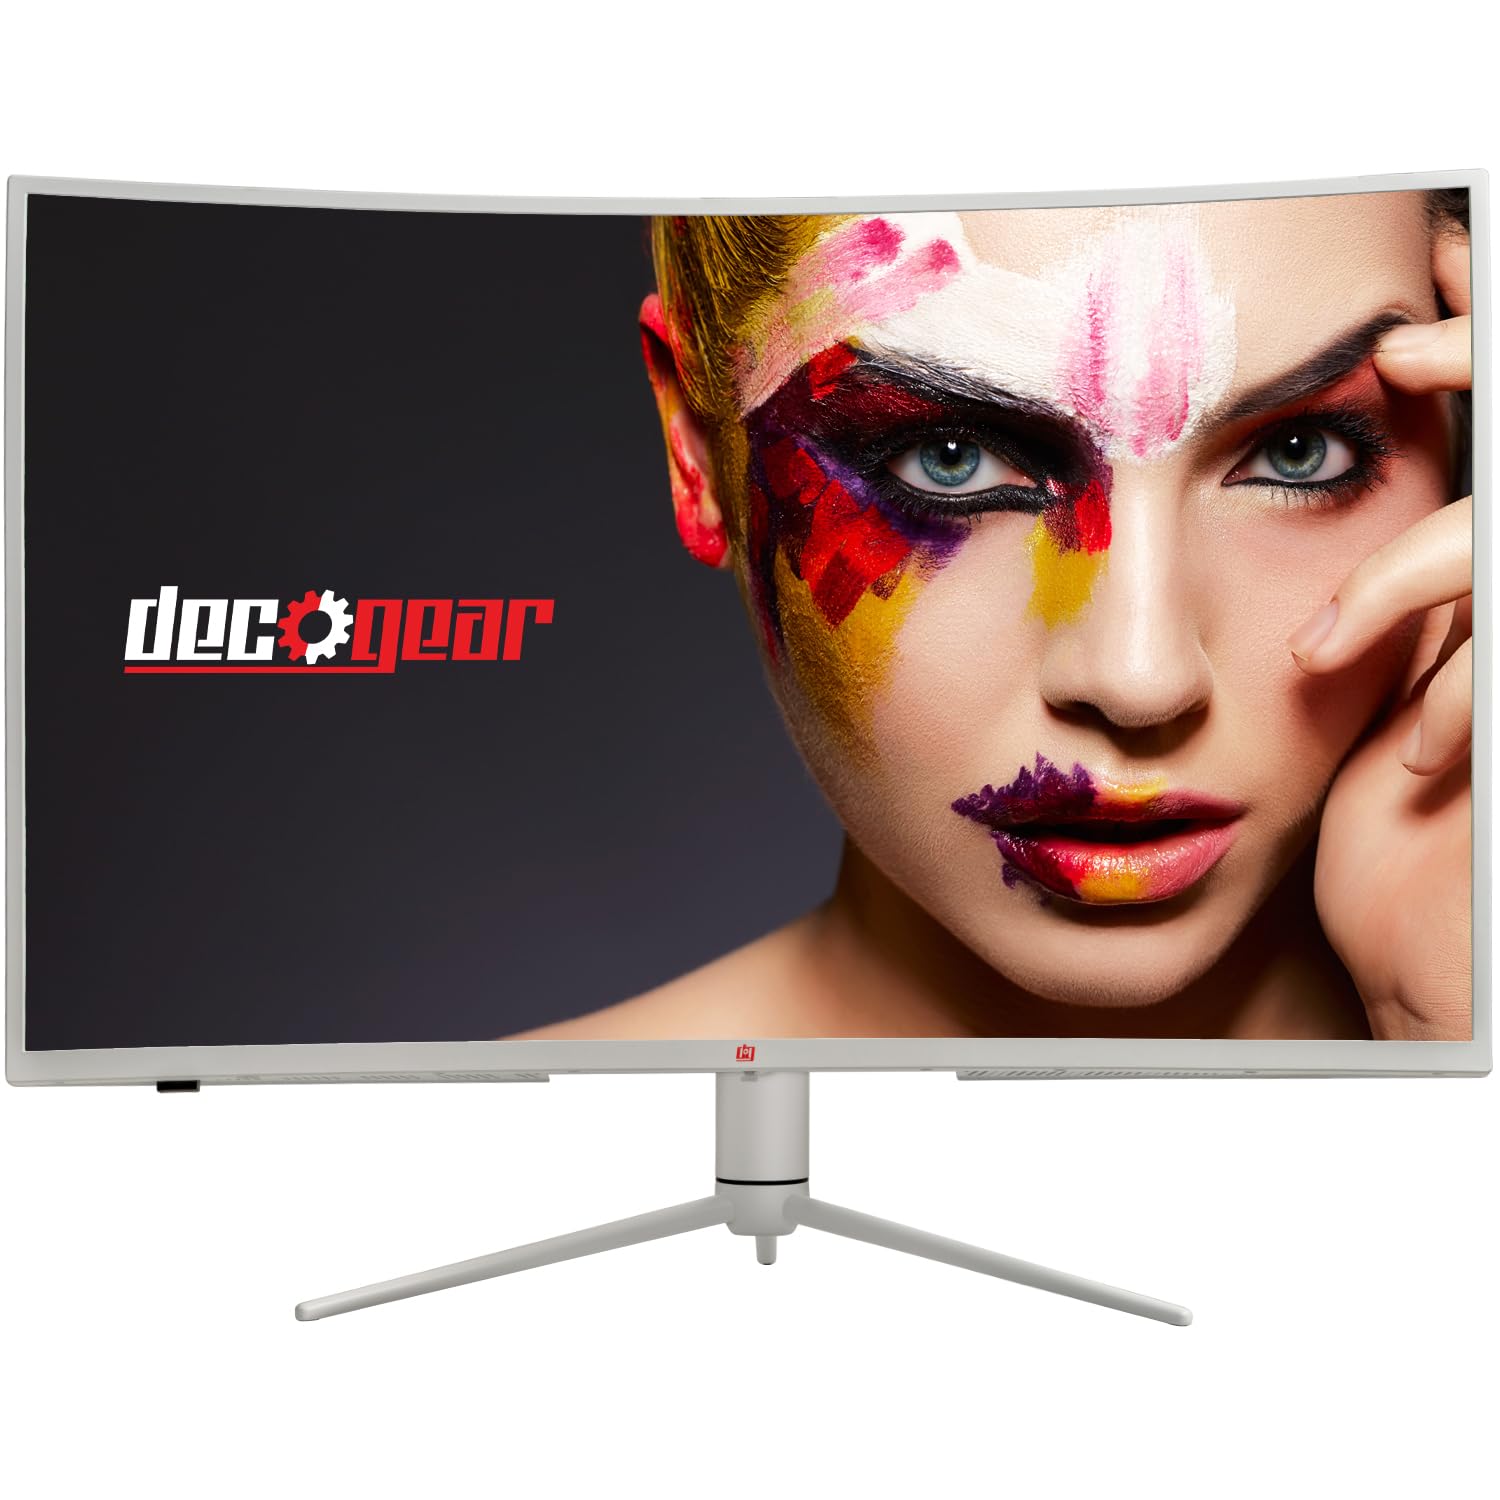 39” Deco Gear 2560x1440 165Hz Curved Ultrawide HDR400 Gaming Monitor $330 + free s/h